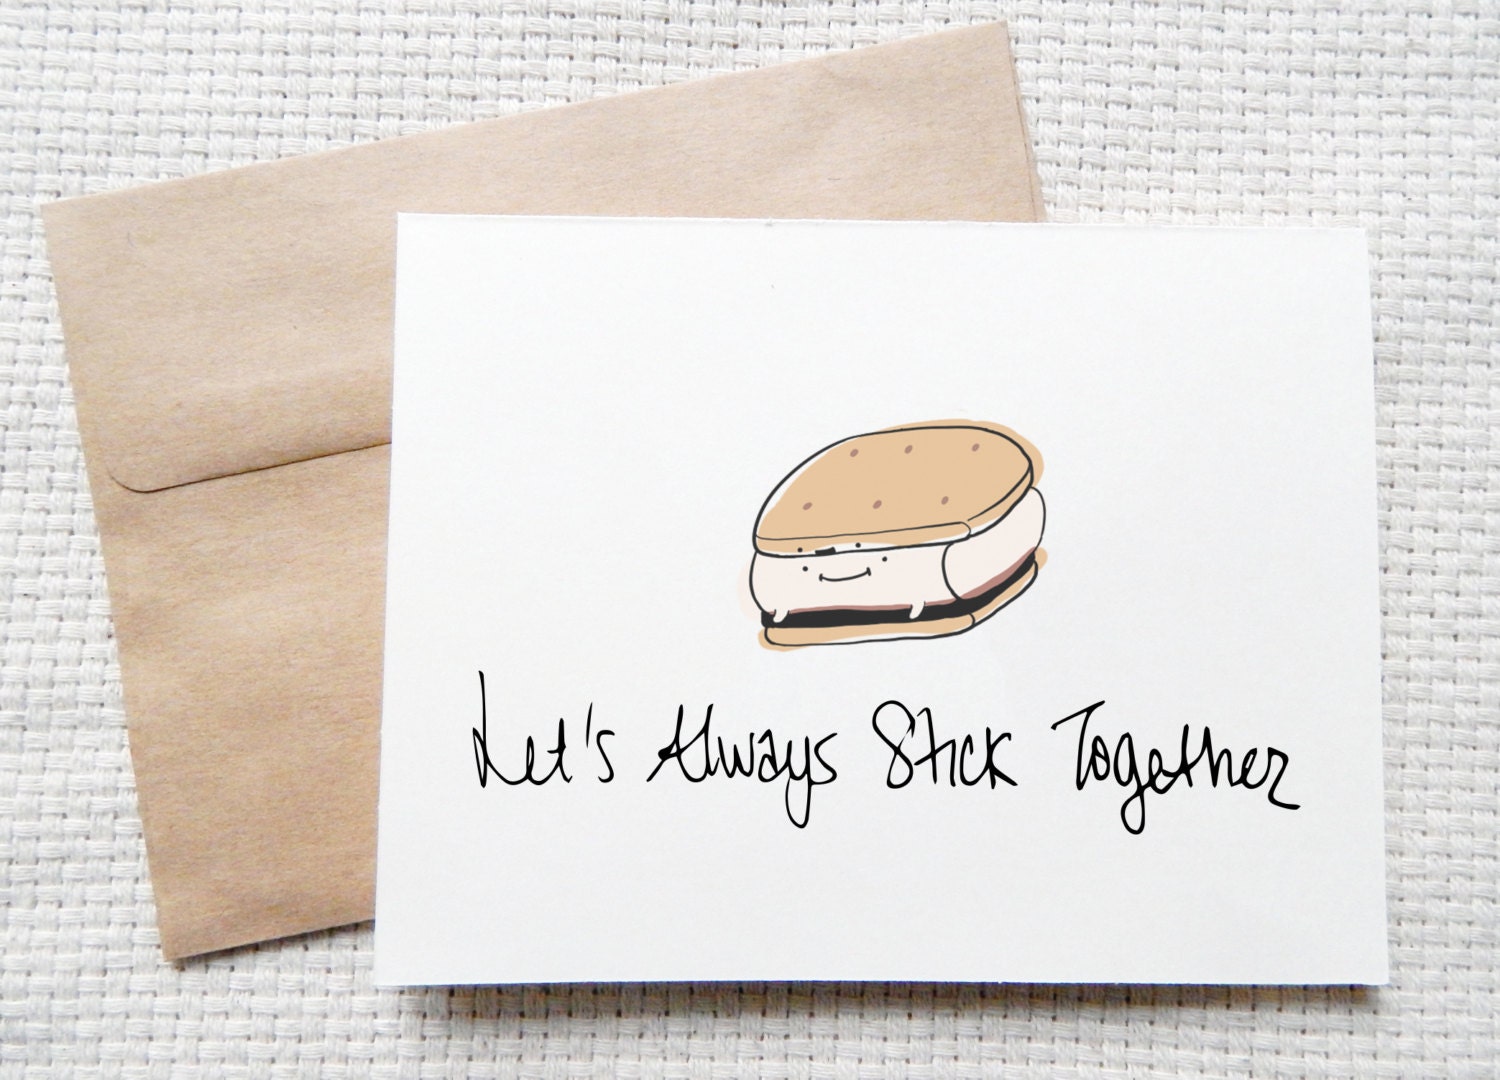 Let's Always Stick Together Card by DolciDays on Etsy